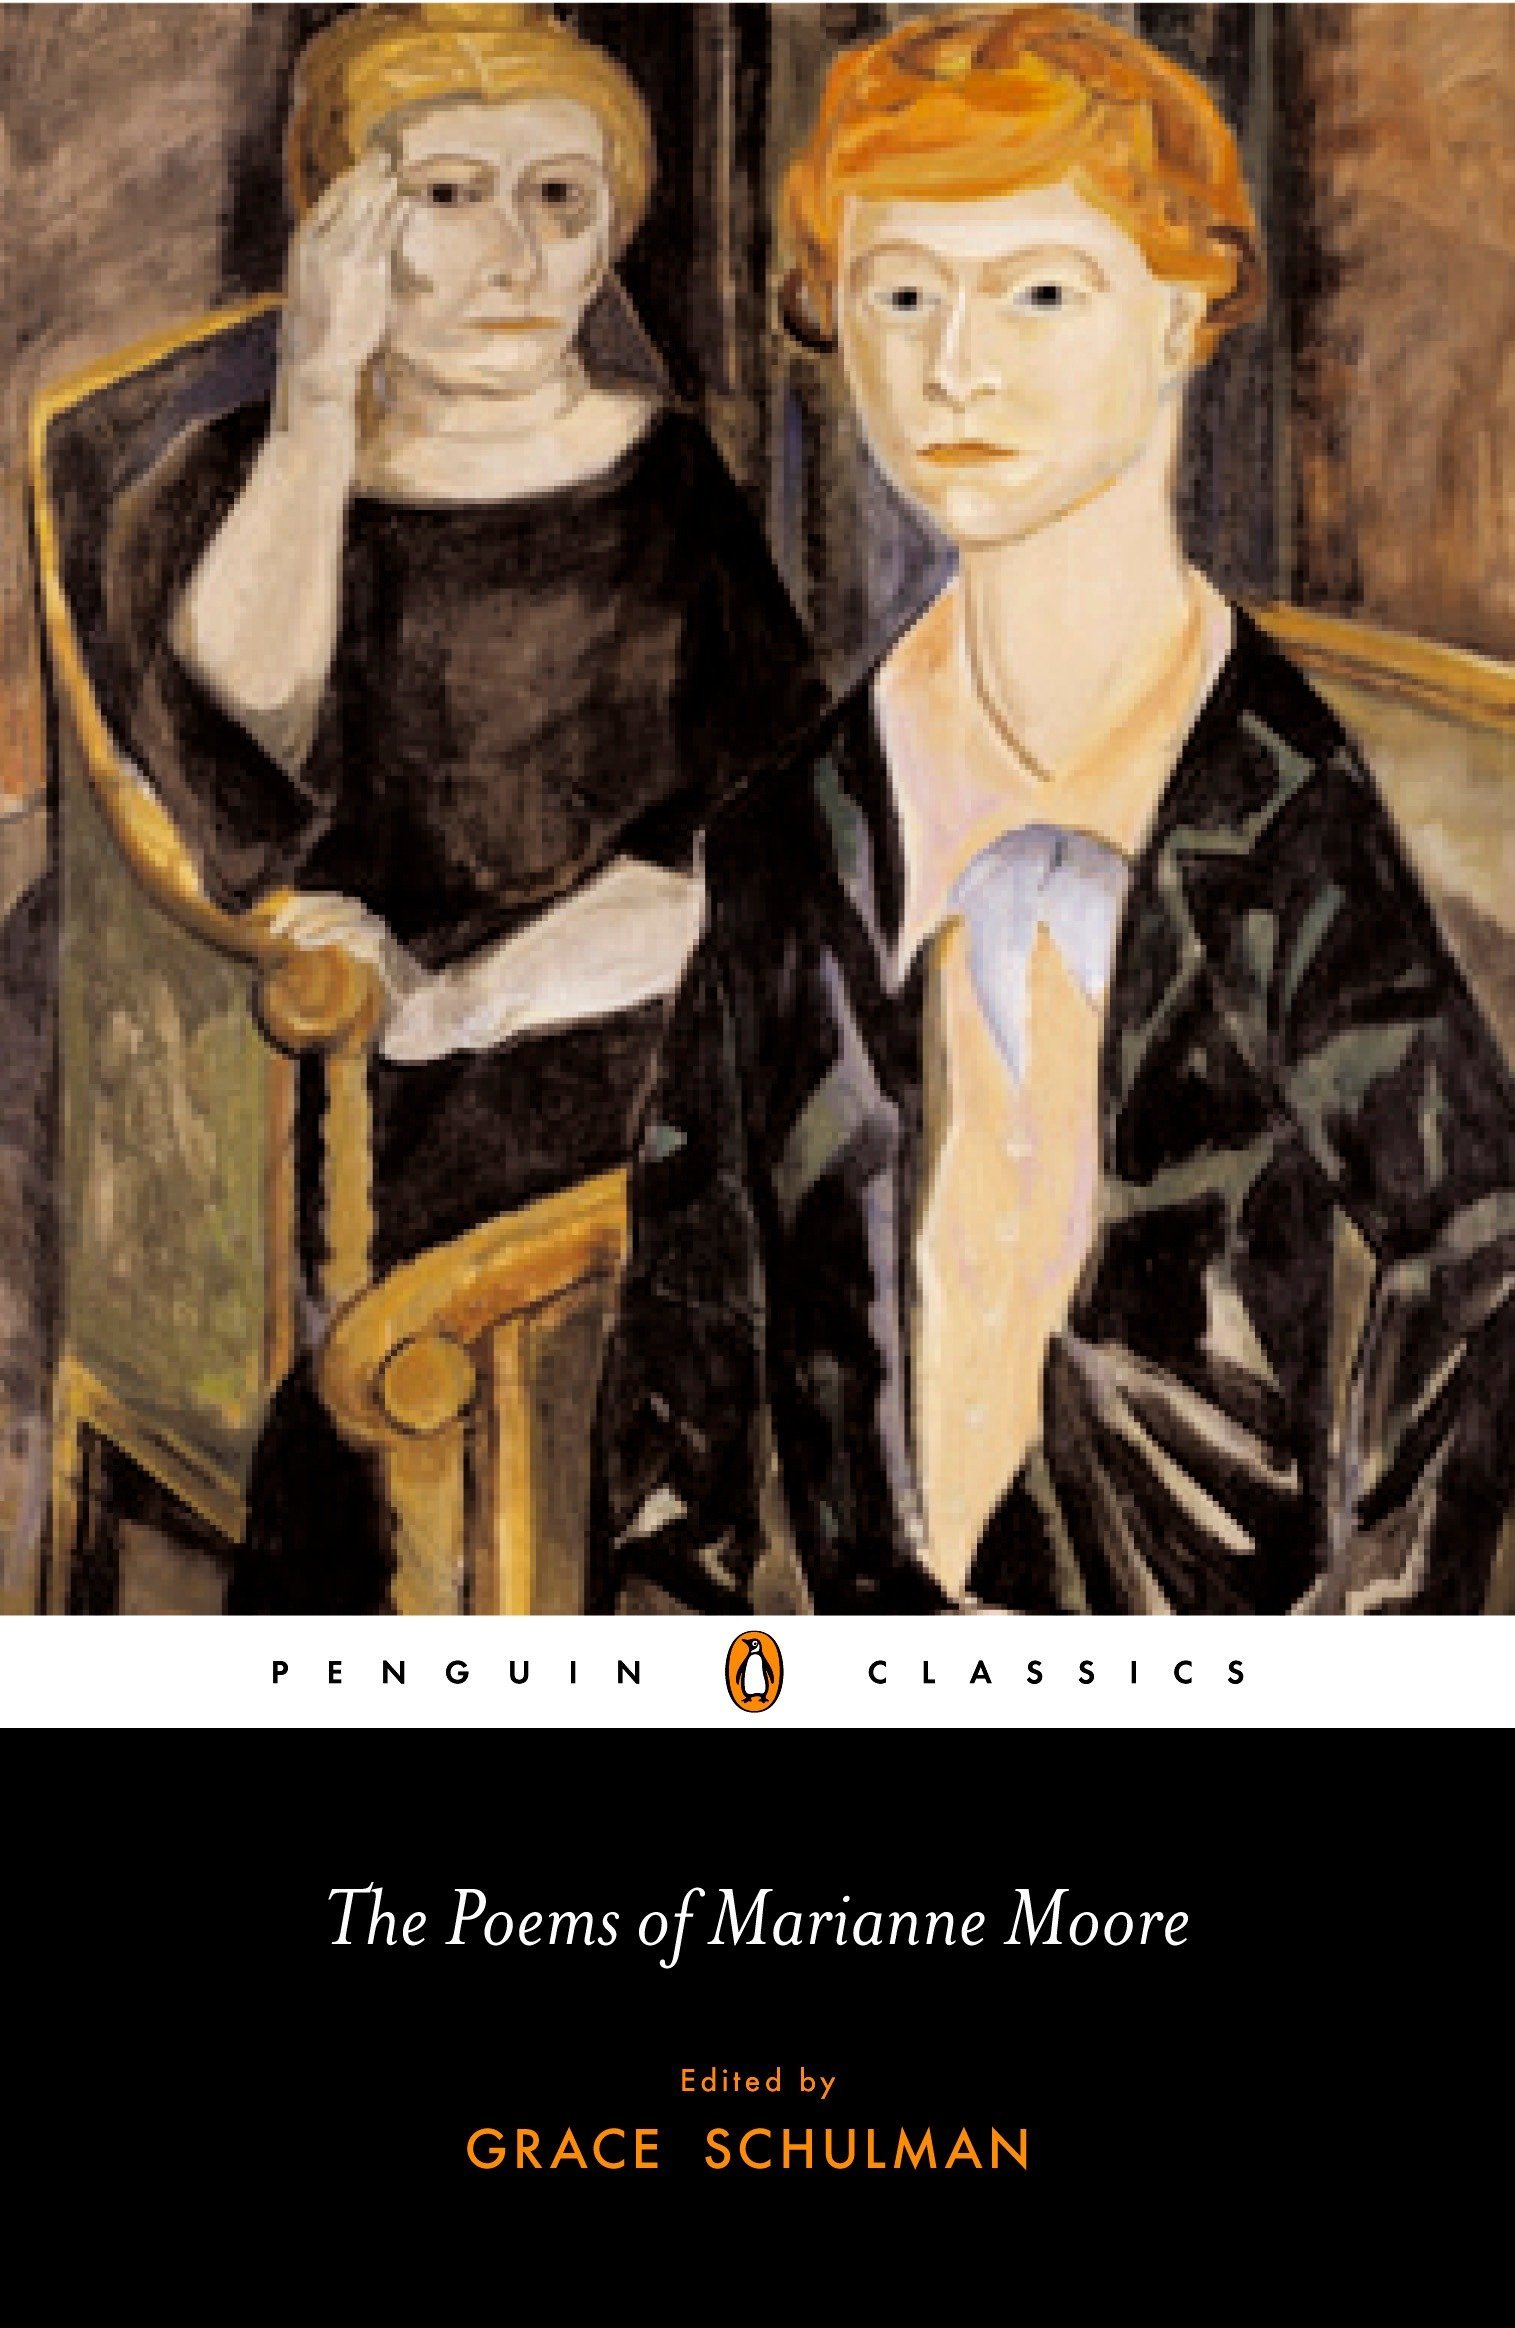 Marianne Moore, Grace Schulman: The poems of Marianne Moore (2005, Penguin Classics)